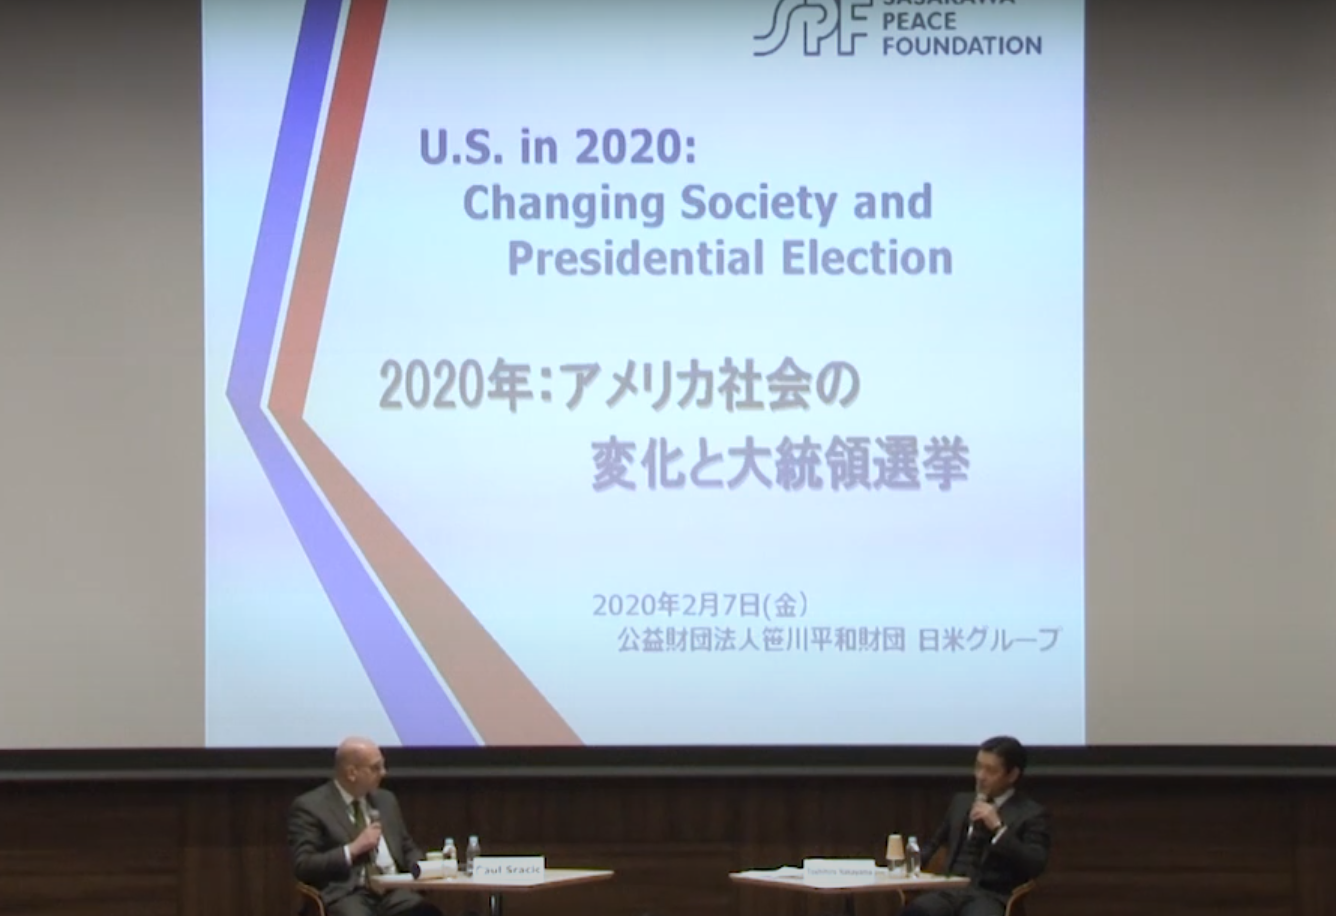 “U.S. in 2020: Changing Society and Presidential Election”